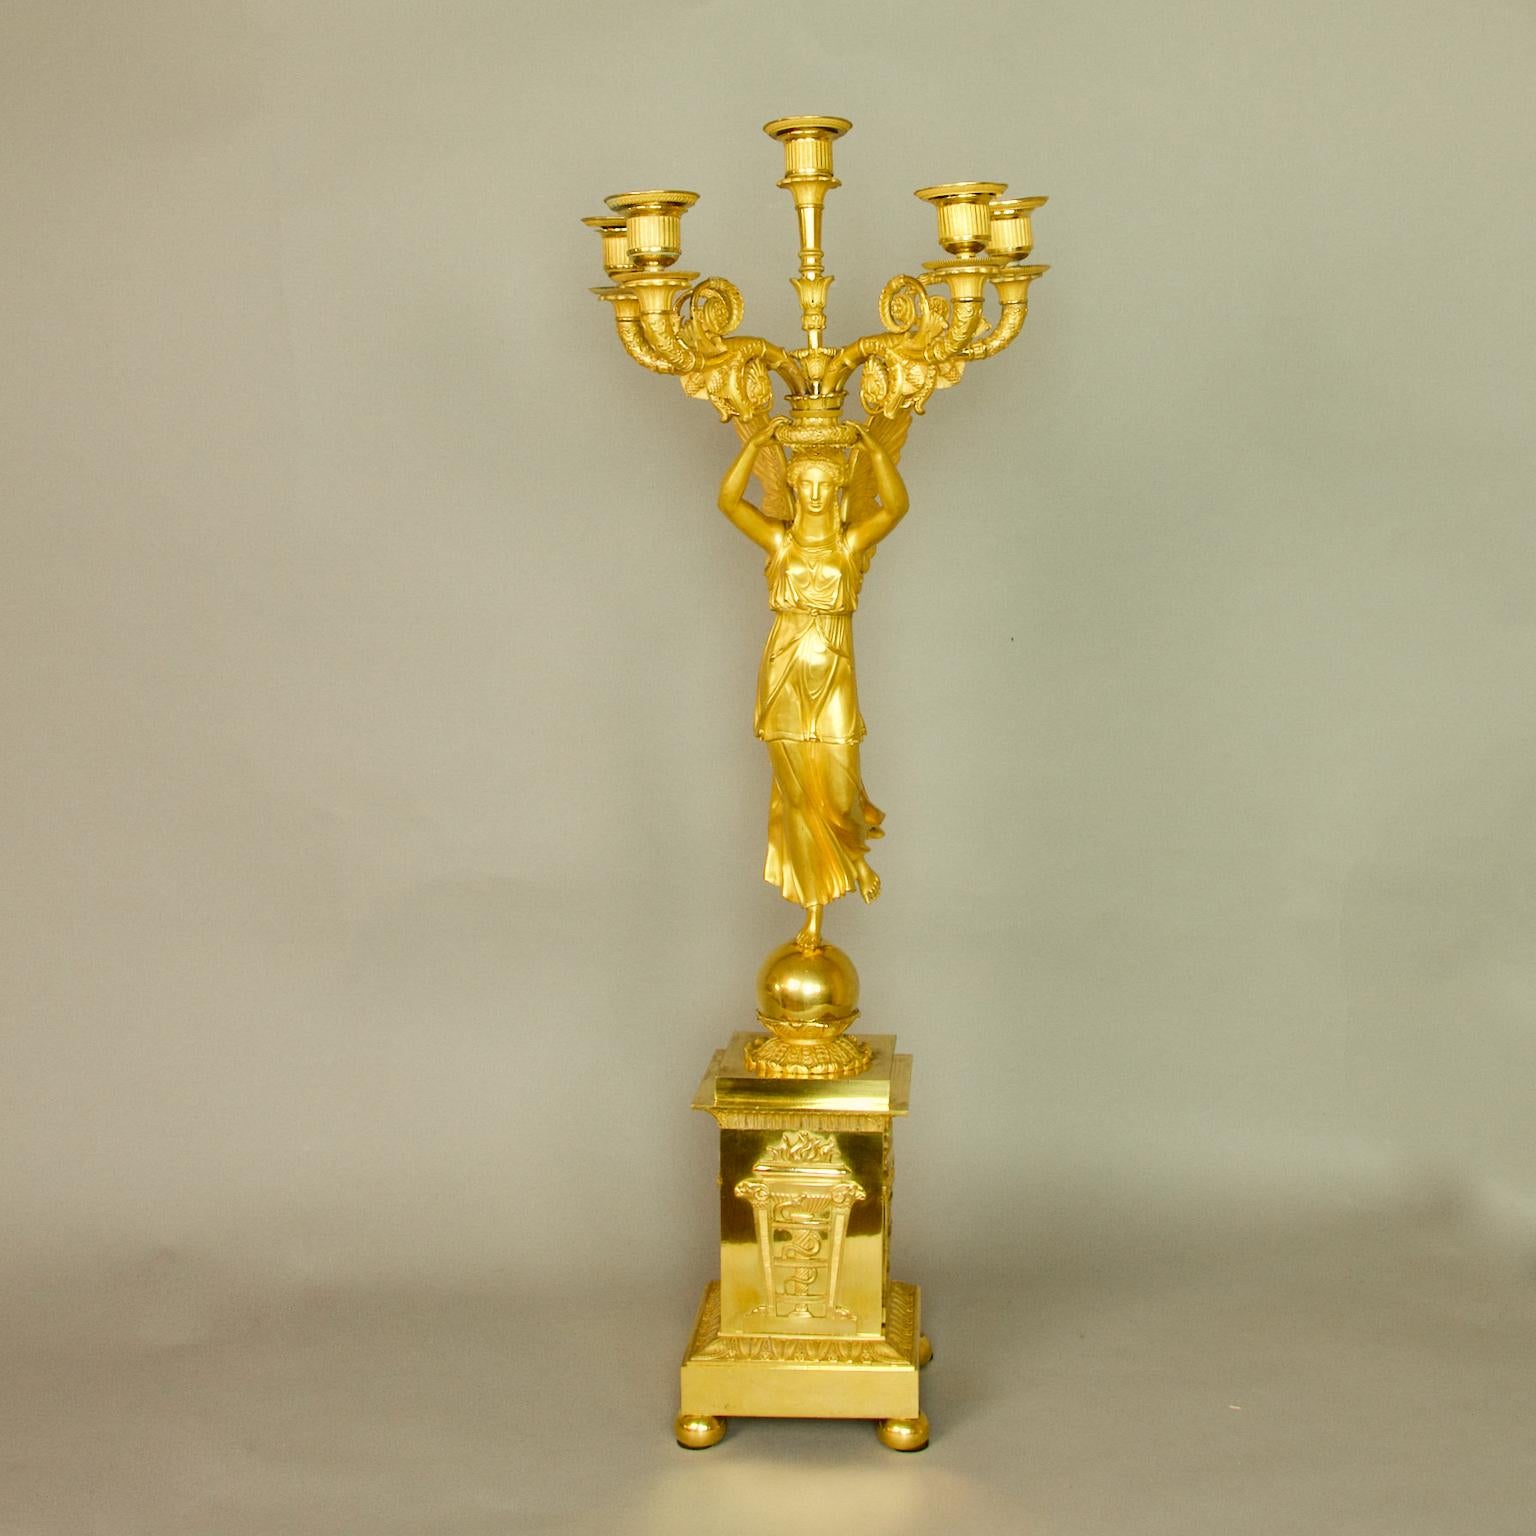 Early 19th Century Pair of French Empire Gilt Bronze Winged Victory Candelabras, attr. P.P. Thomire